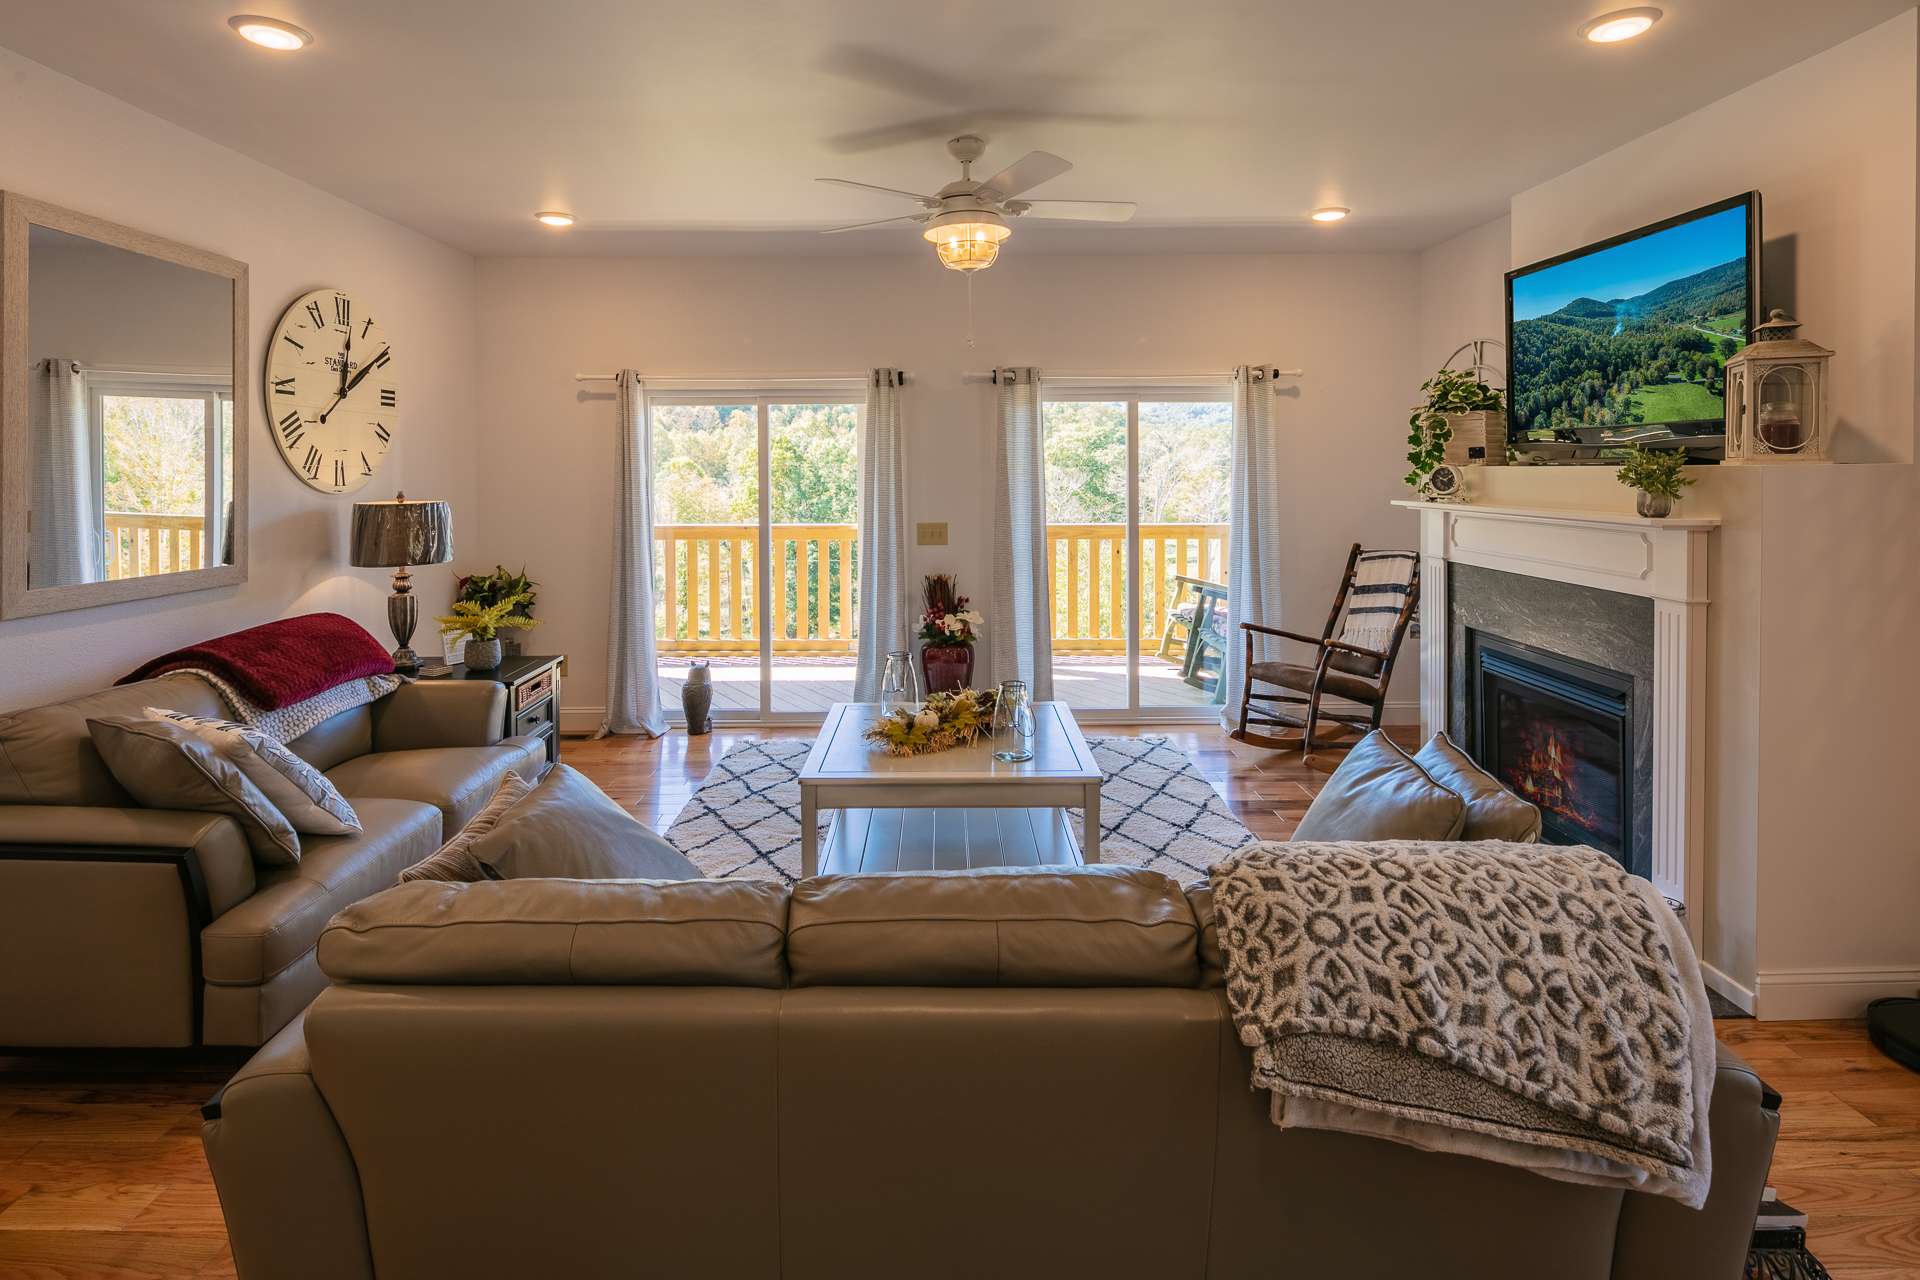 The living area features gorgeous gleaming 5" oak flooring and a Buck Stove gas fireplace.